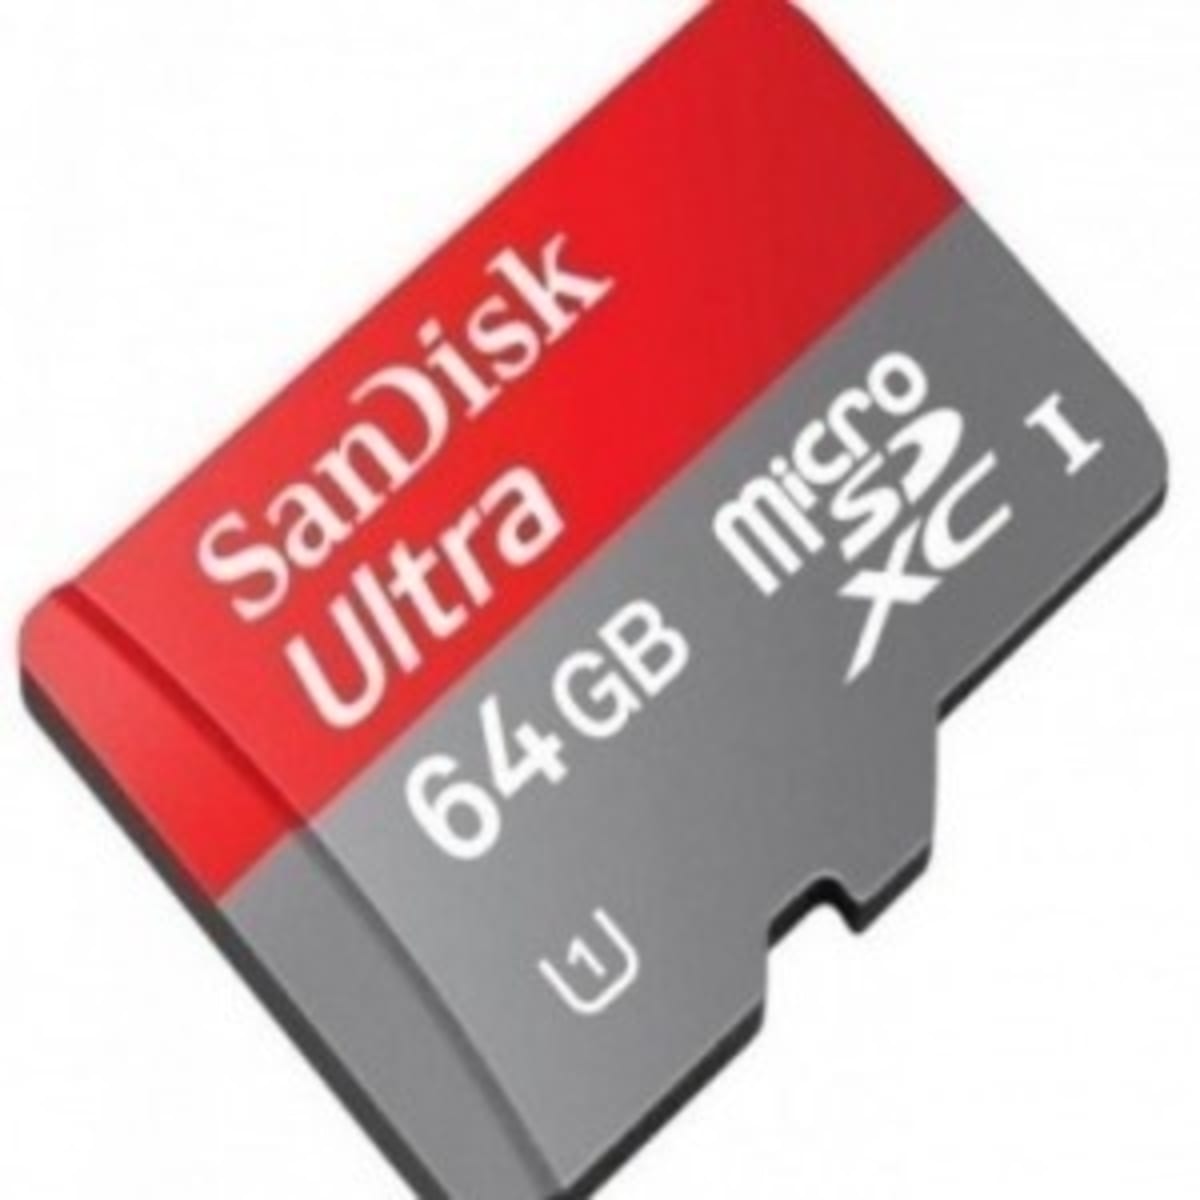 64 GB Memory Micro SD Card - Android Compatible